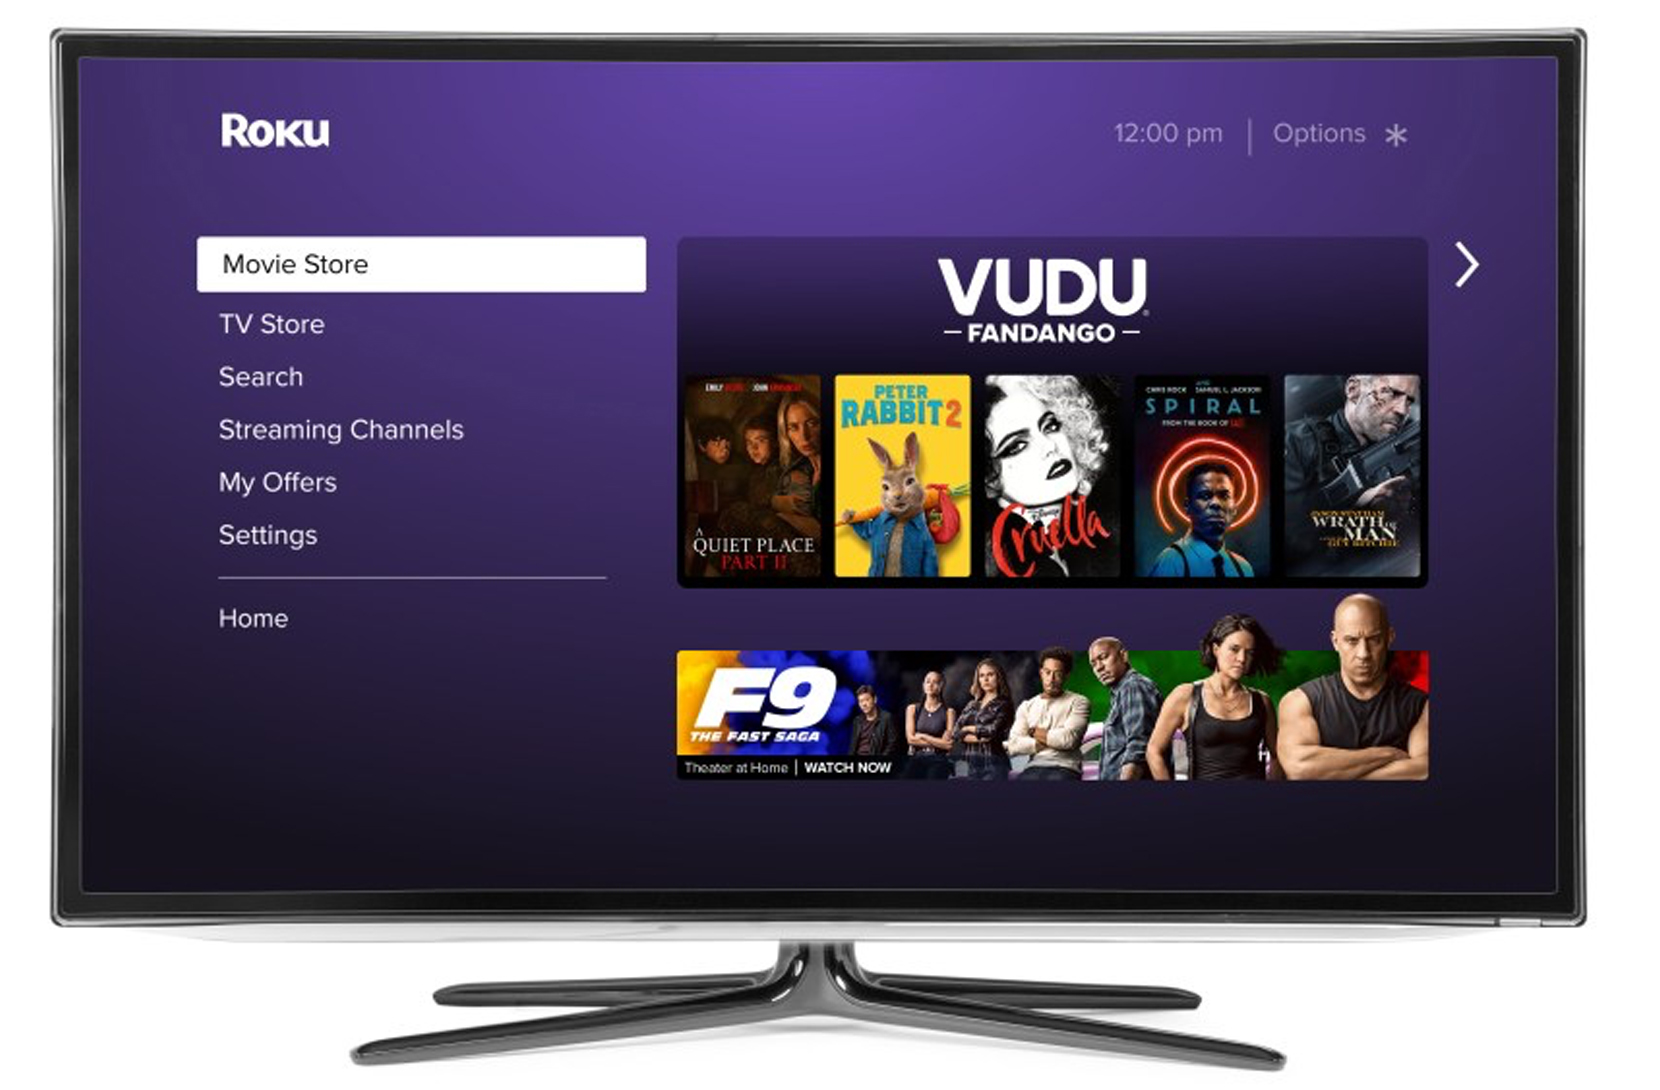 Fandango Unites Its Two Popular Streaming Services On Vudu, Creating The Ultimate On-demand Entertainment Platform